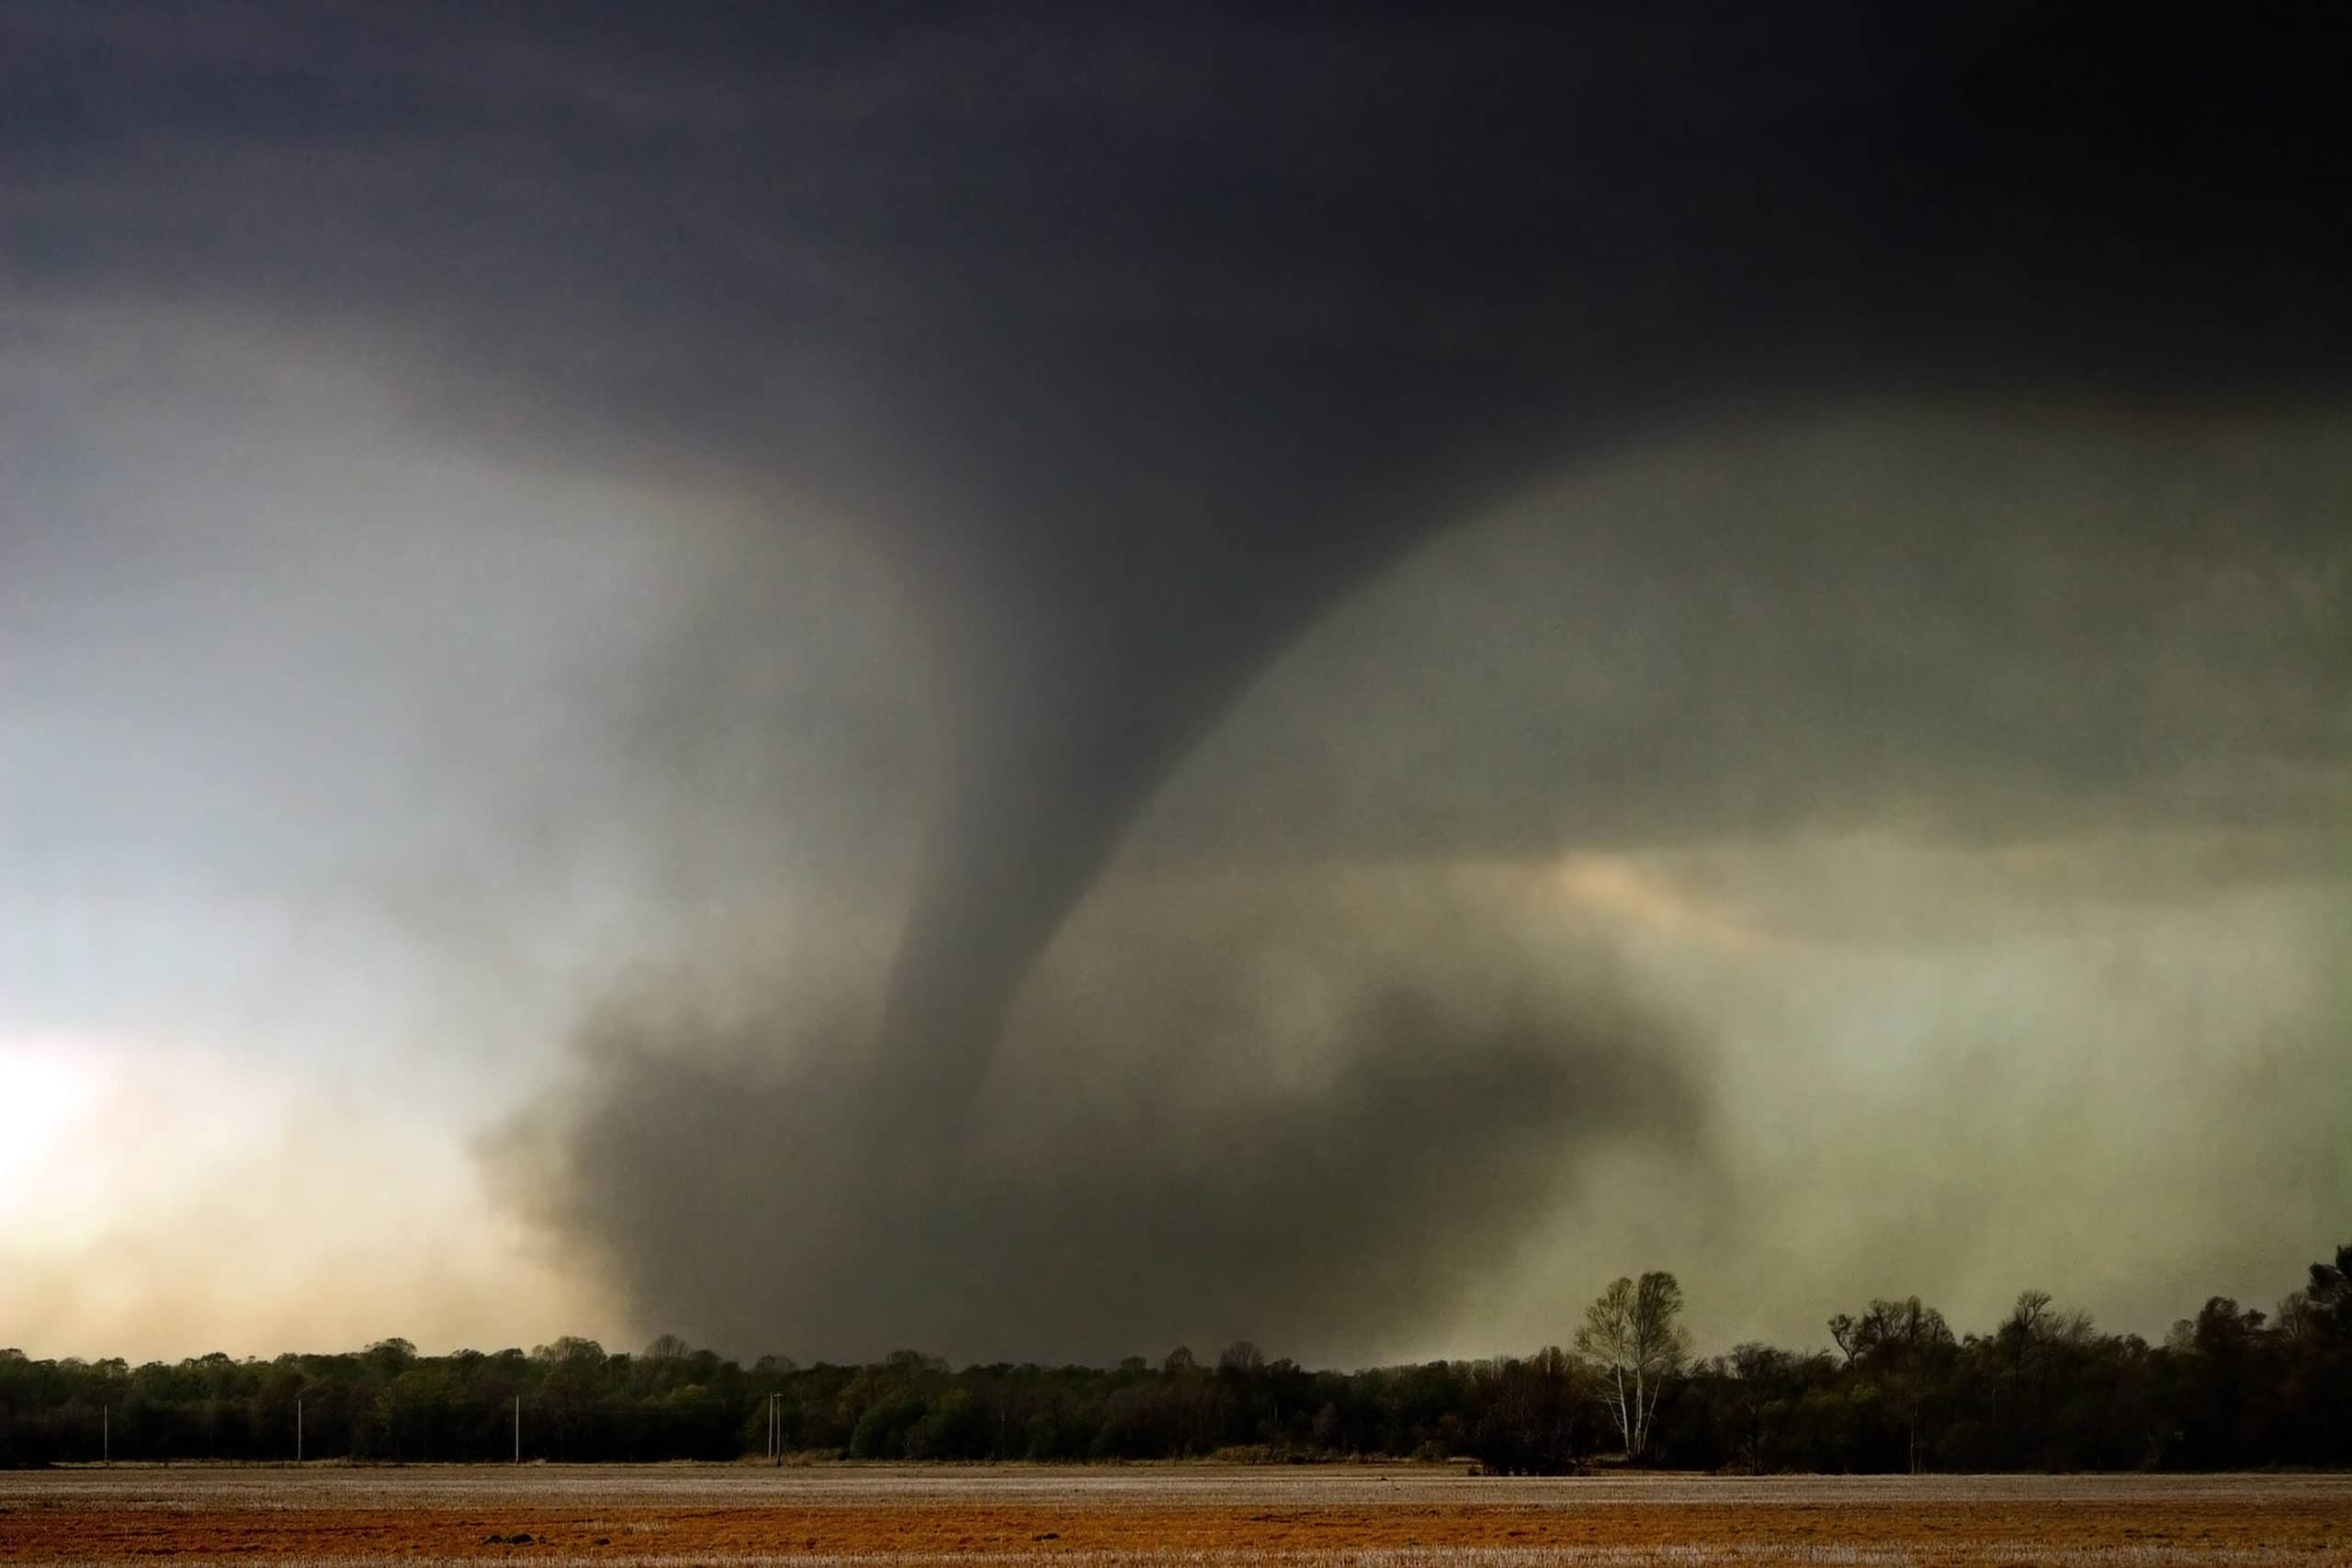 Community resilience assessment of an EF-5 tornado using the IN-CORE modeling environment